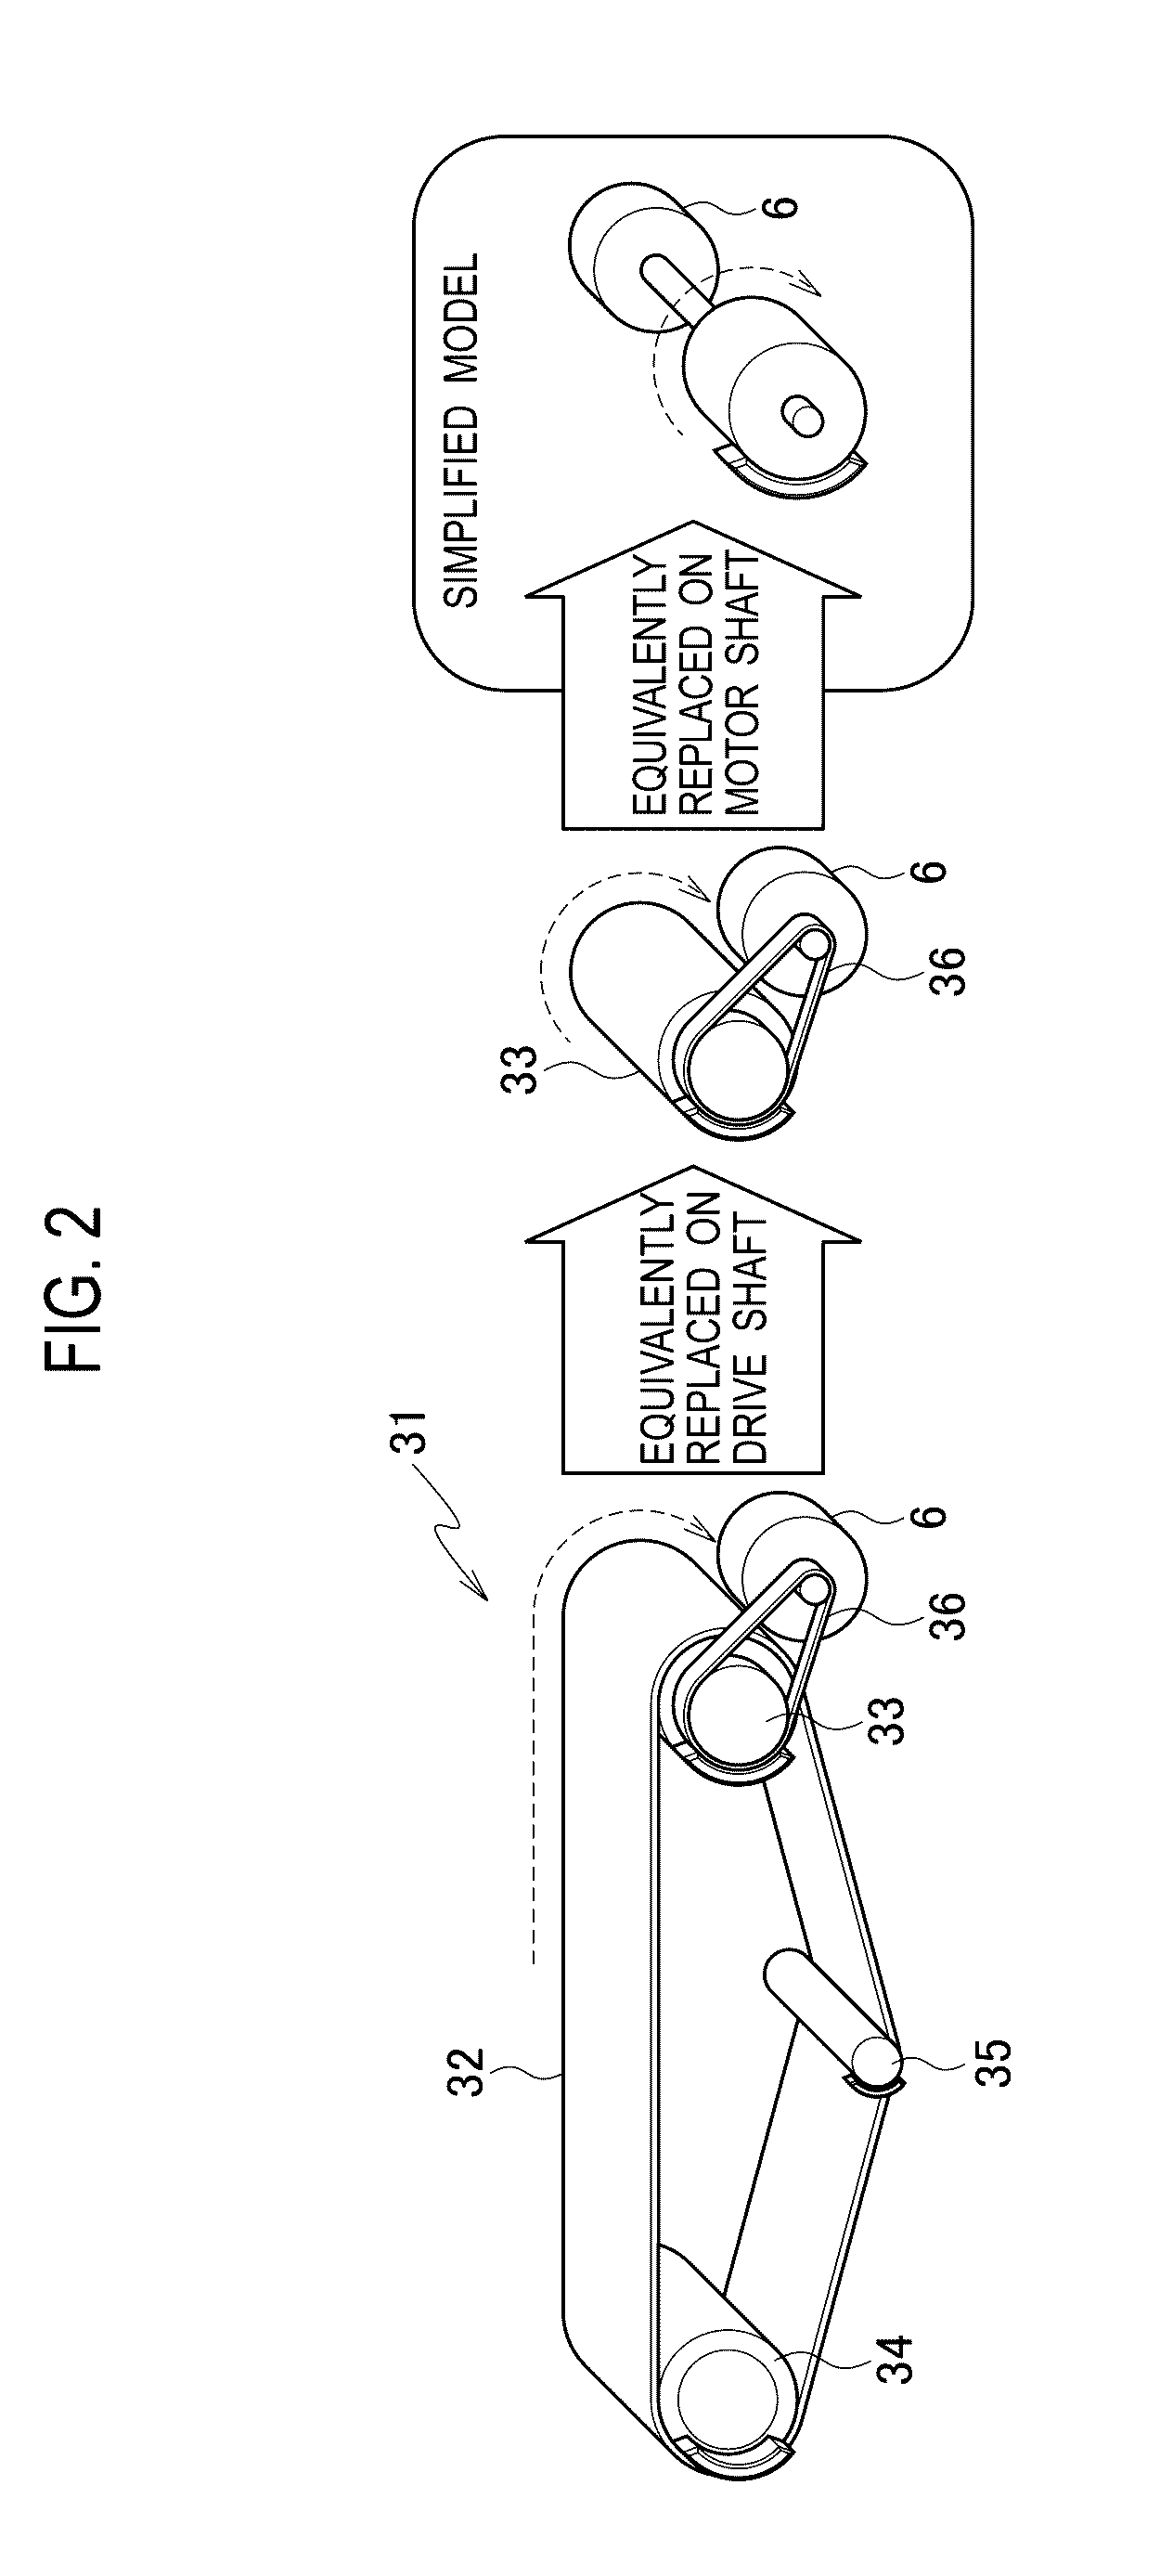 Drive control device using pwm control of synchronous rectification type